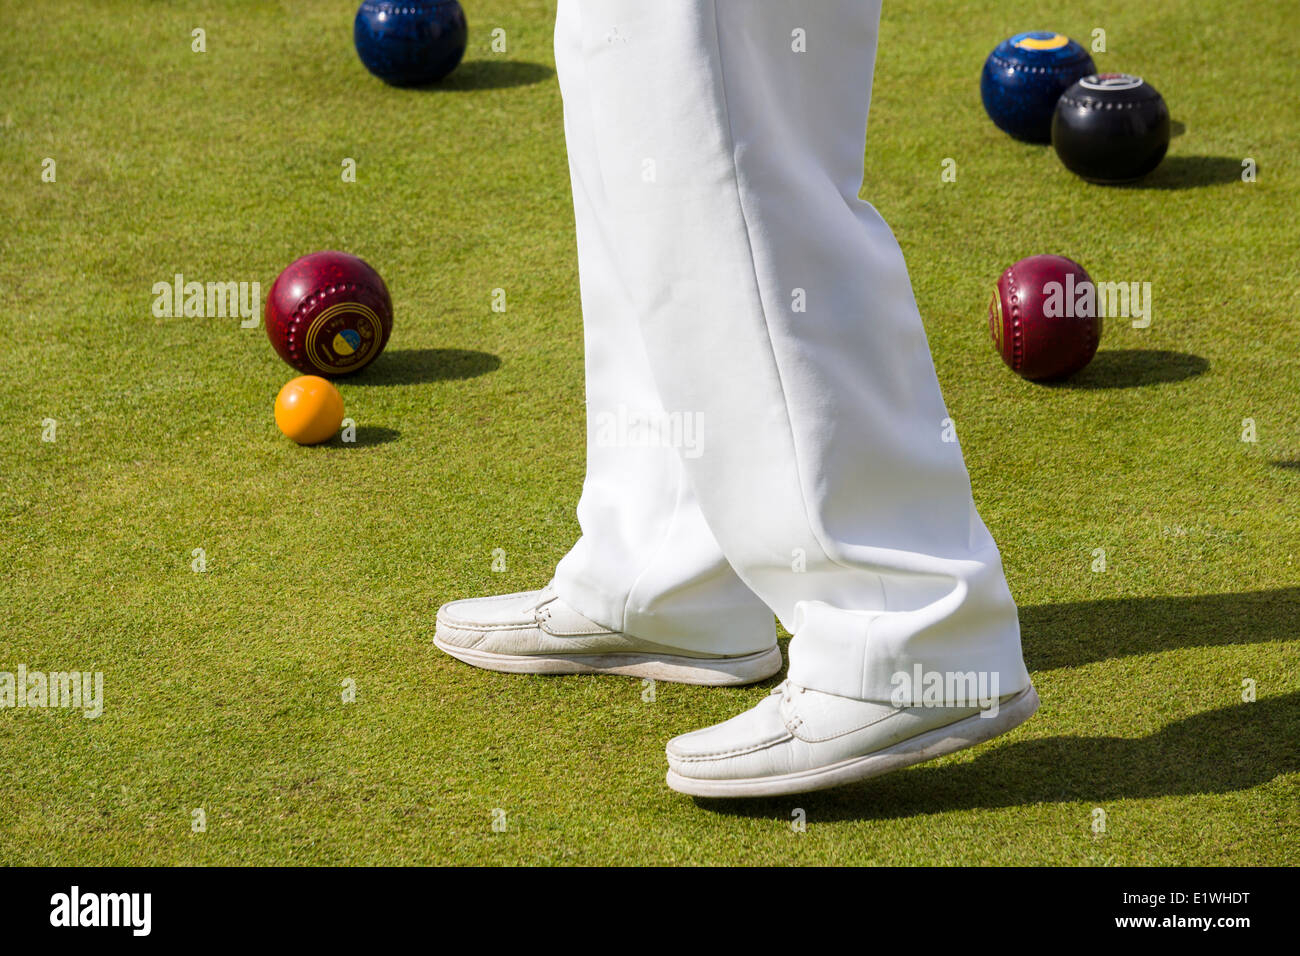 A Bowler observes the 'Jack' during a game of Lawn Bowls in the sunshine on a bowling green in the UK. Stock Photo